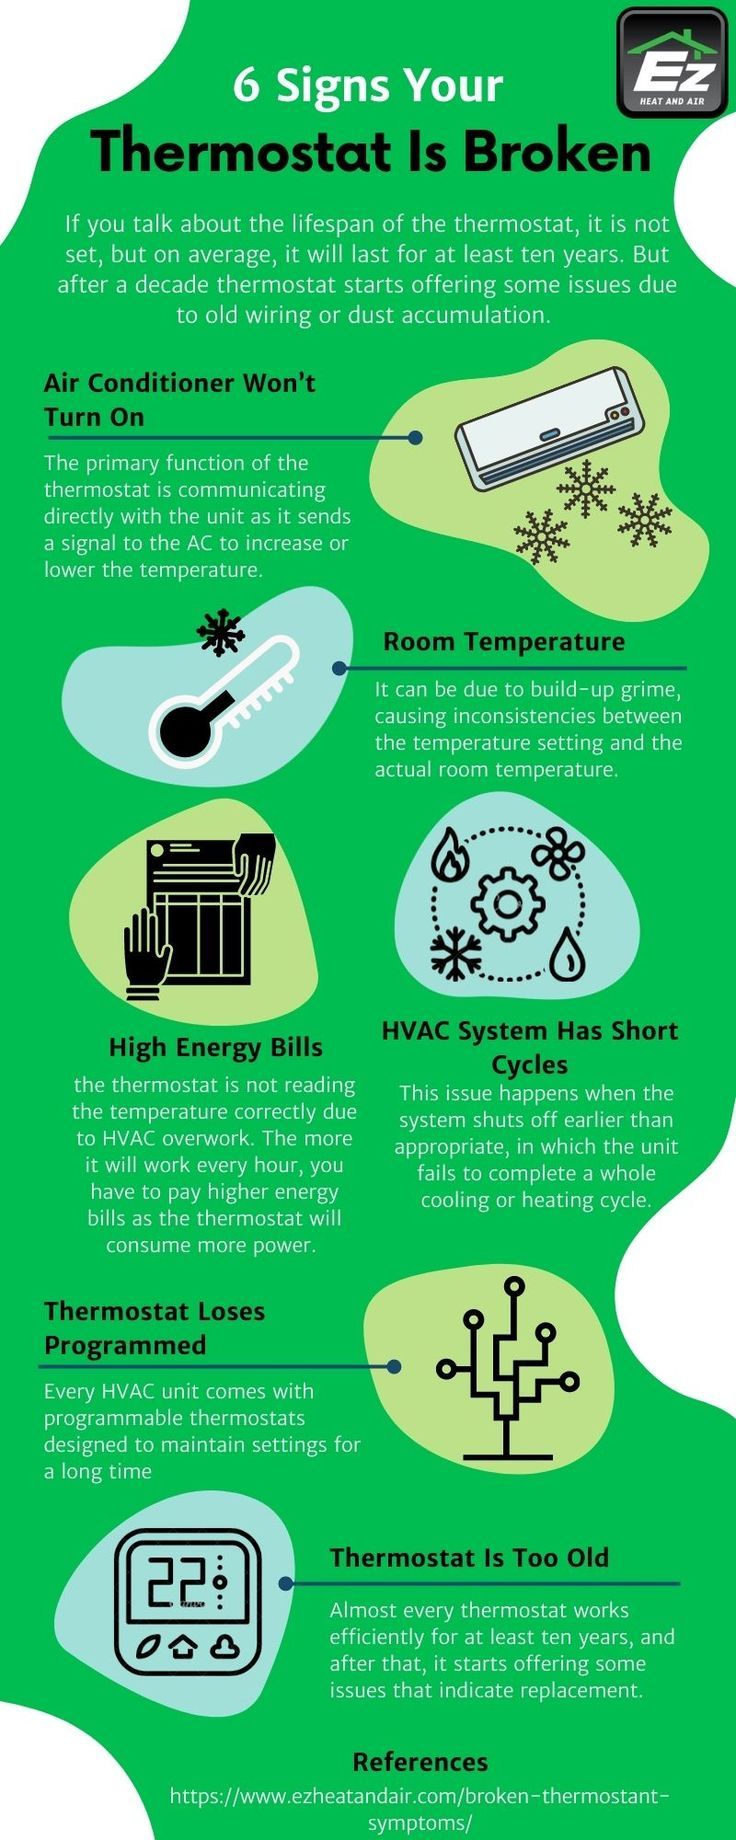 6 Signs Your Thermostat Is Broken